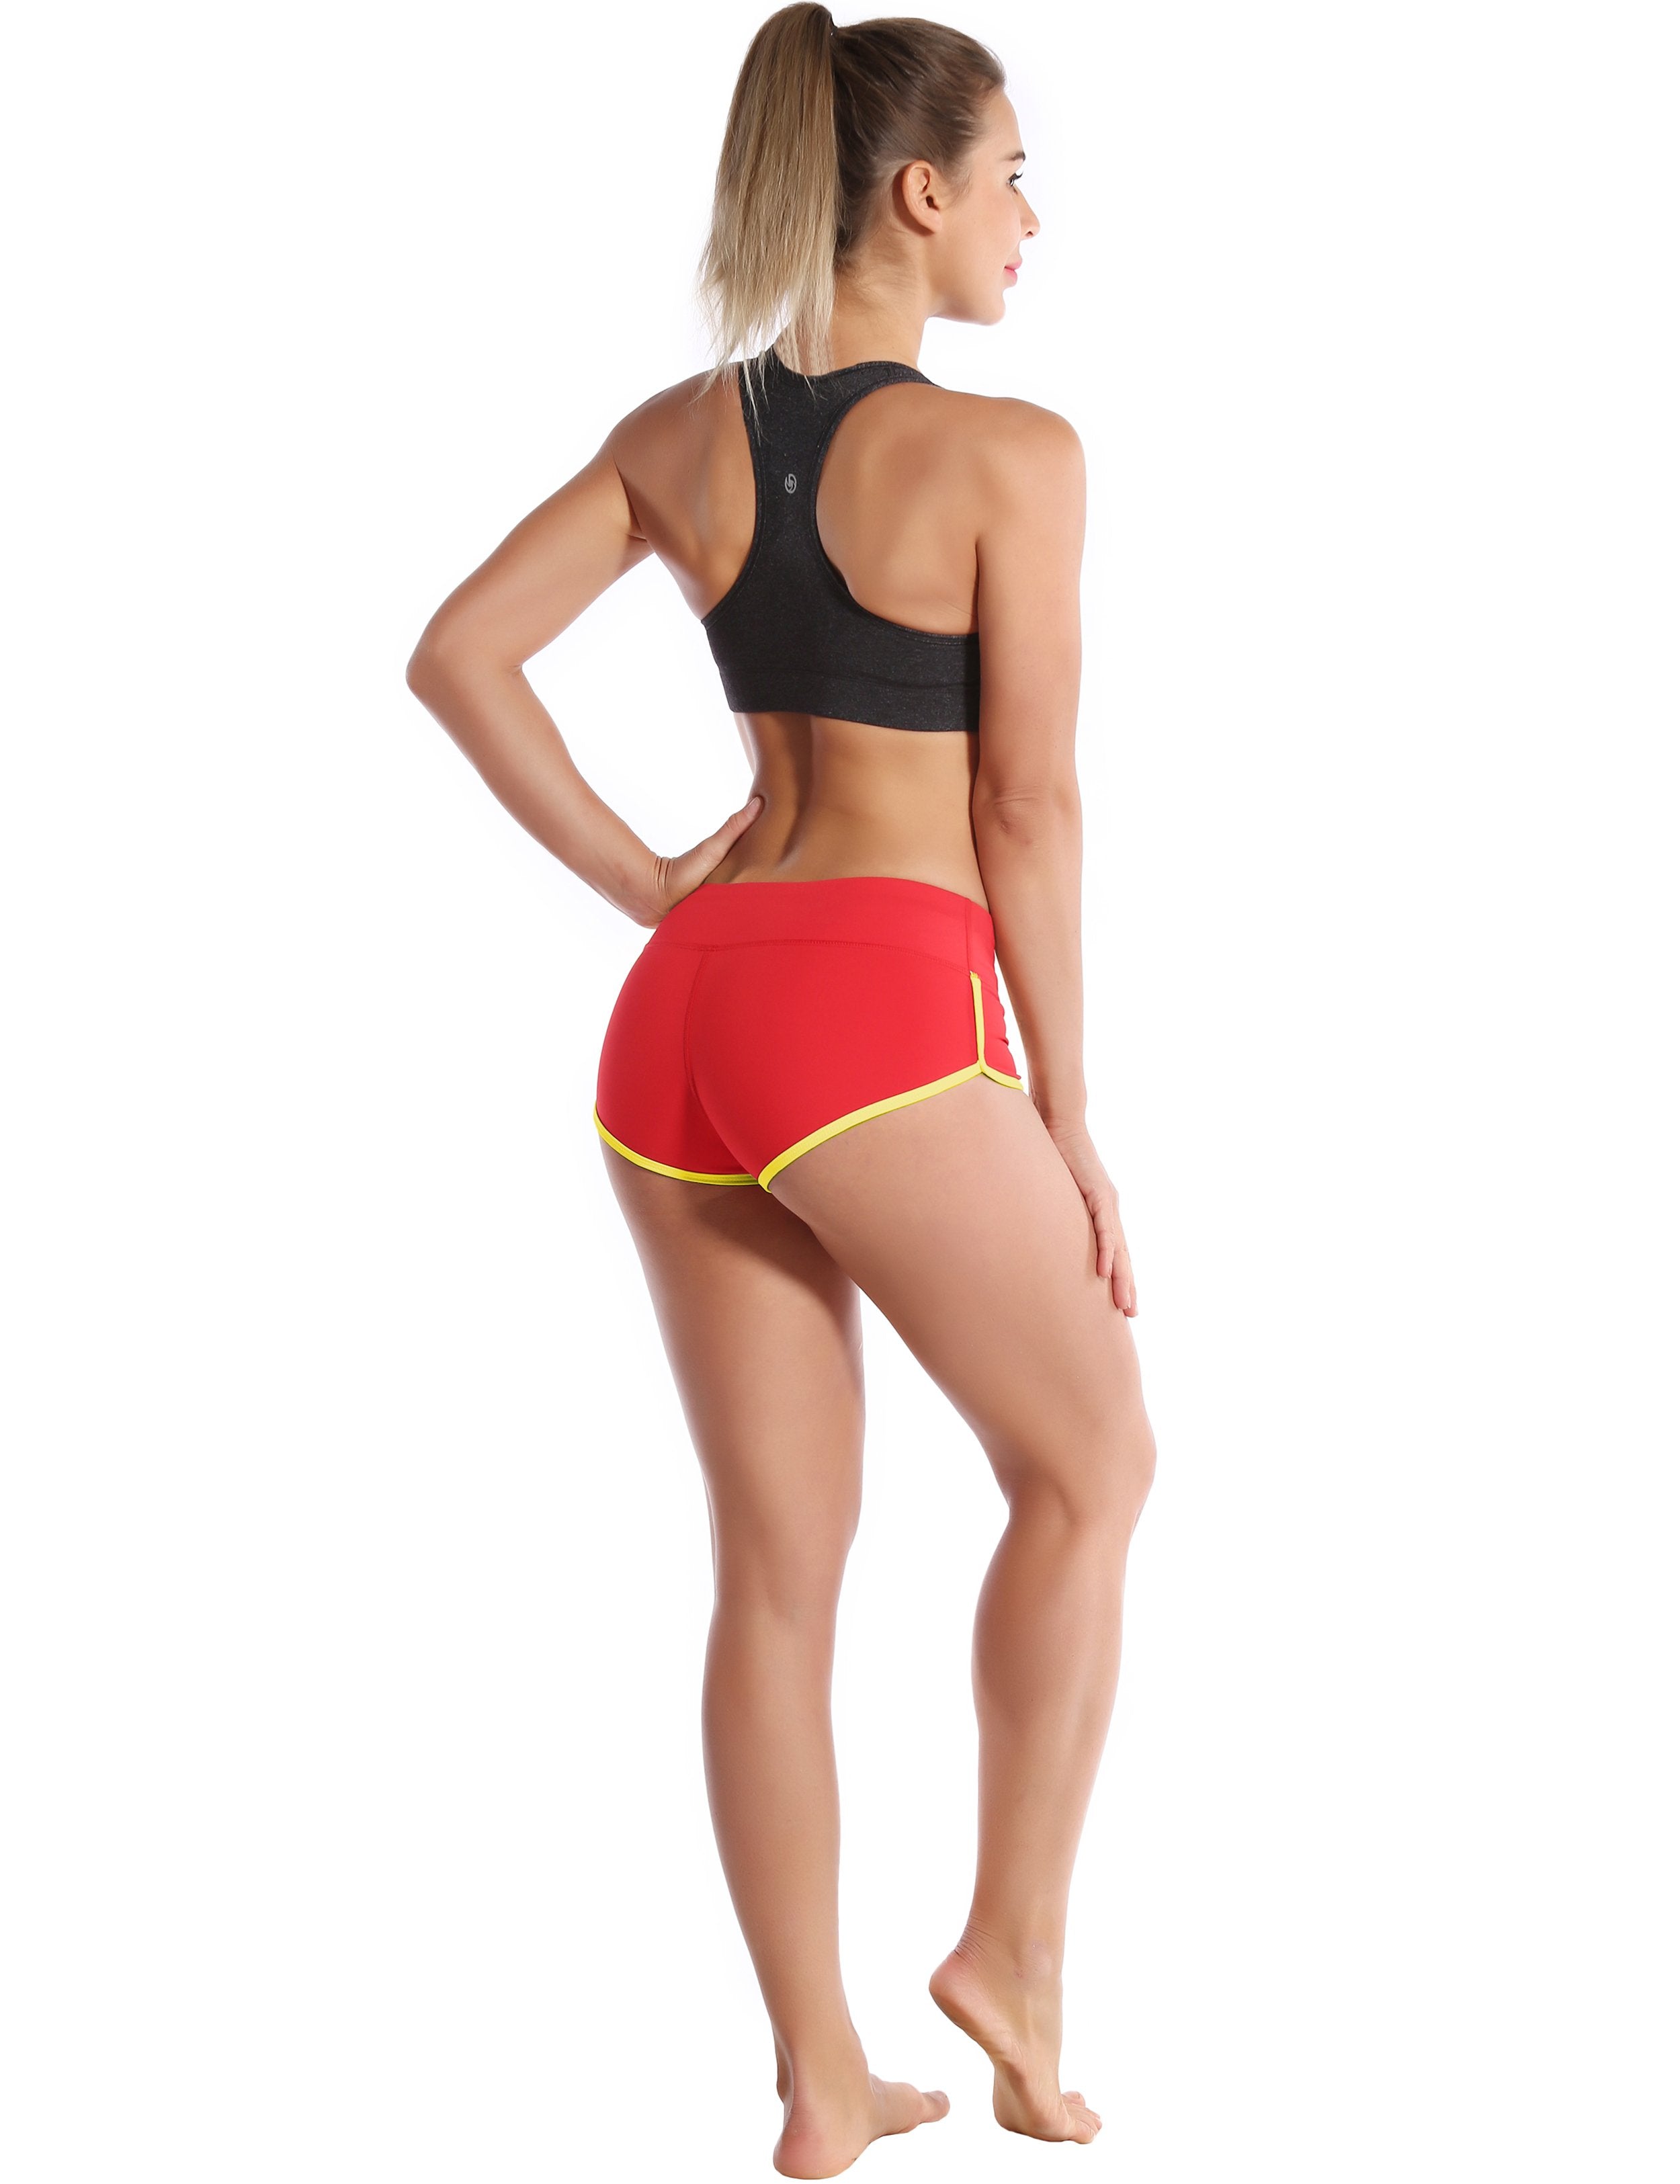 Sexy Booty Yoga Shorts scarlet_fluorescentyellow Sleek, soft, smooth and totally comfortable: our newest sexy style is here. Softest-ever fabric High elasticity High density 4-way stretch Fabric doesn't attract lint easily No see-through Moisture-wicking Machine wash 75%Nylon/25%Spandex